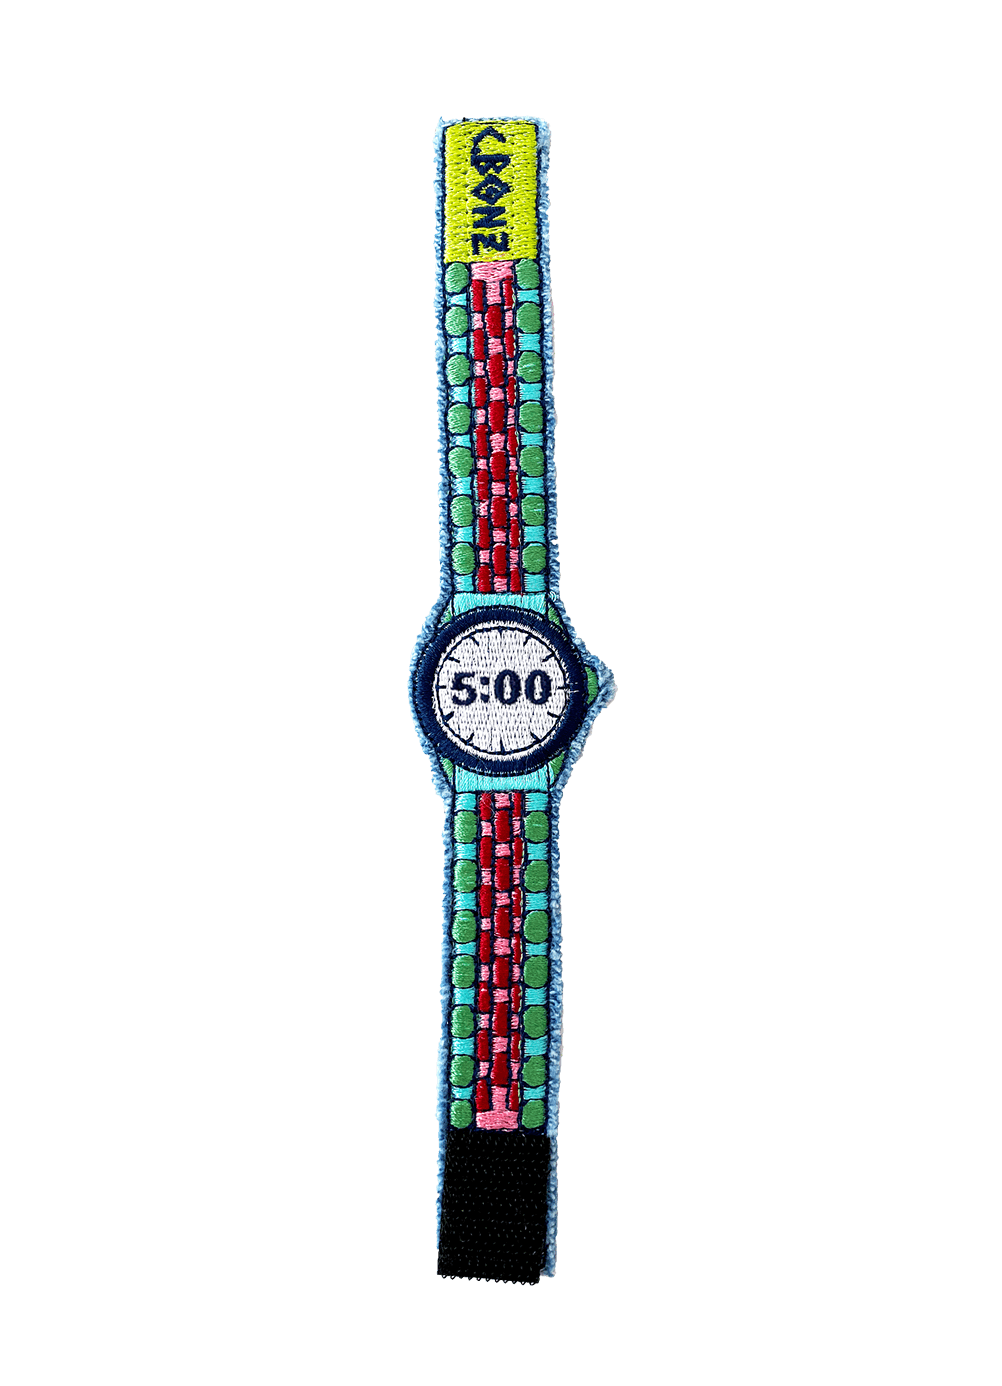 5:00 Embroidered "Watch" Bracelet